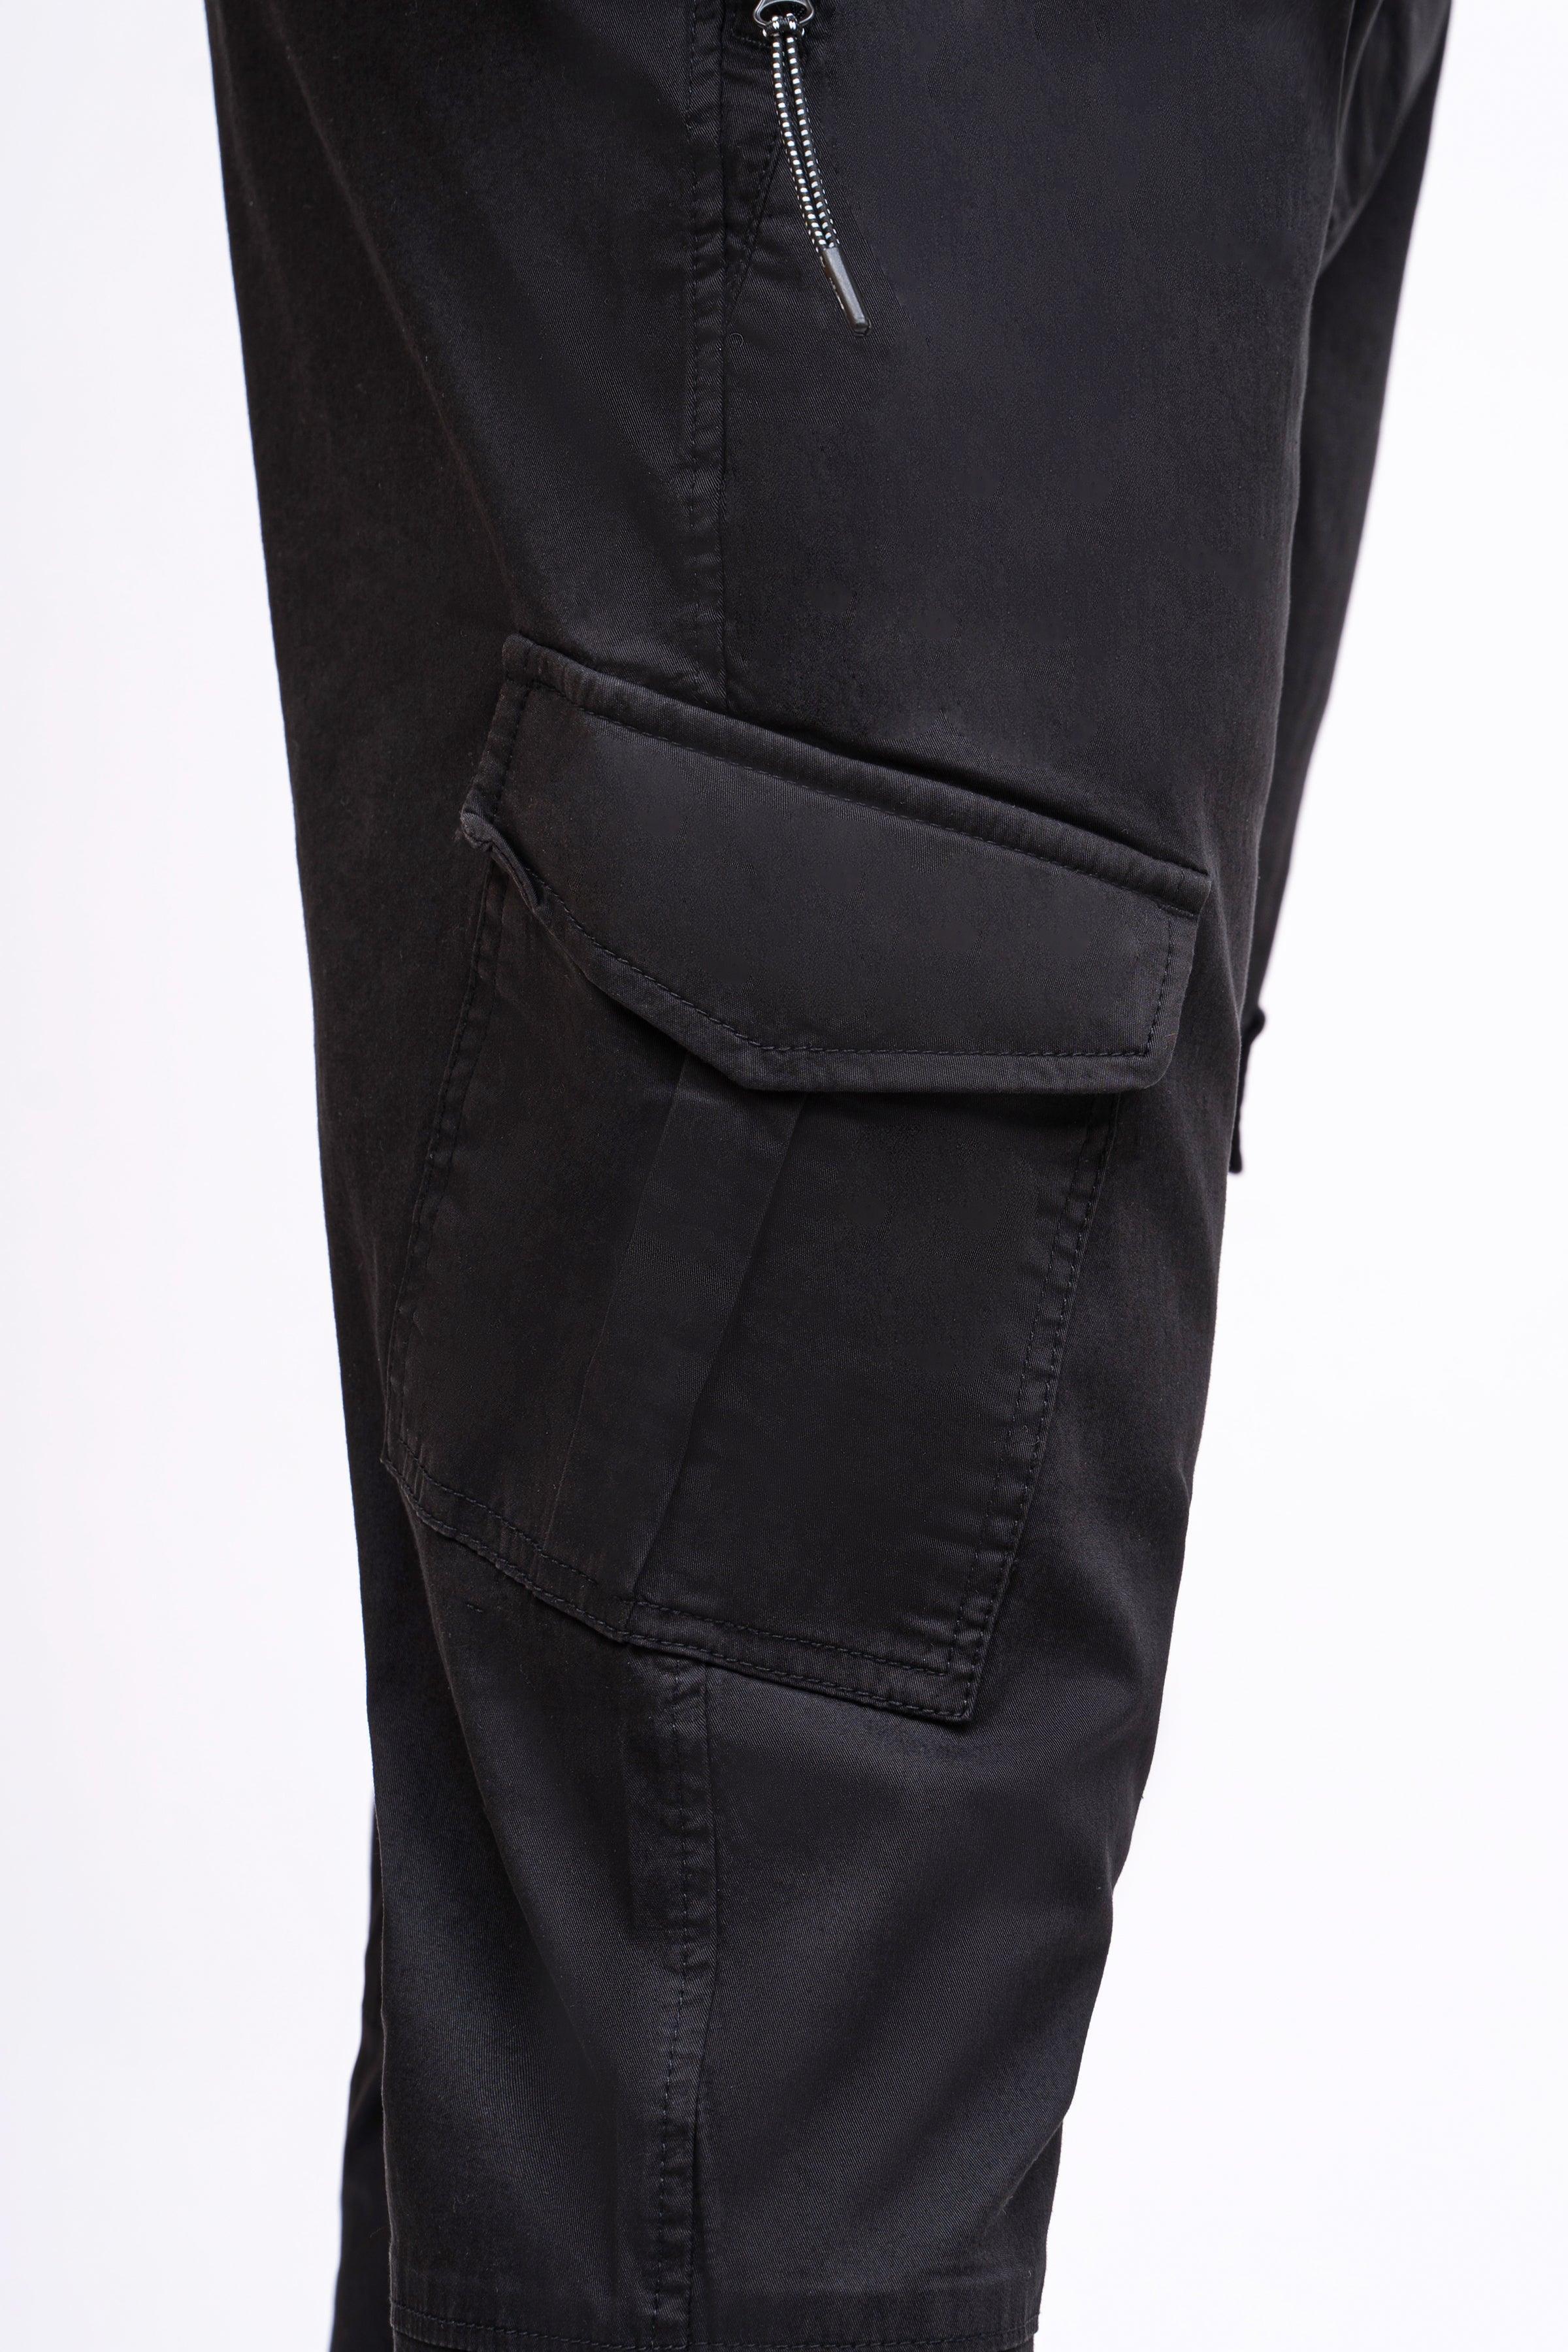 CASUAL JOGAR TROUSER JET BLACK at Charcoal Clothing